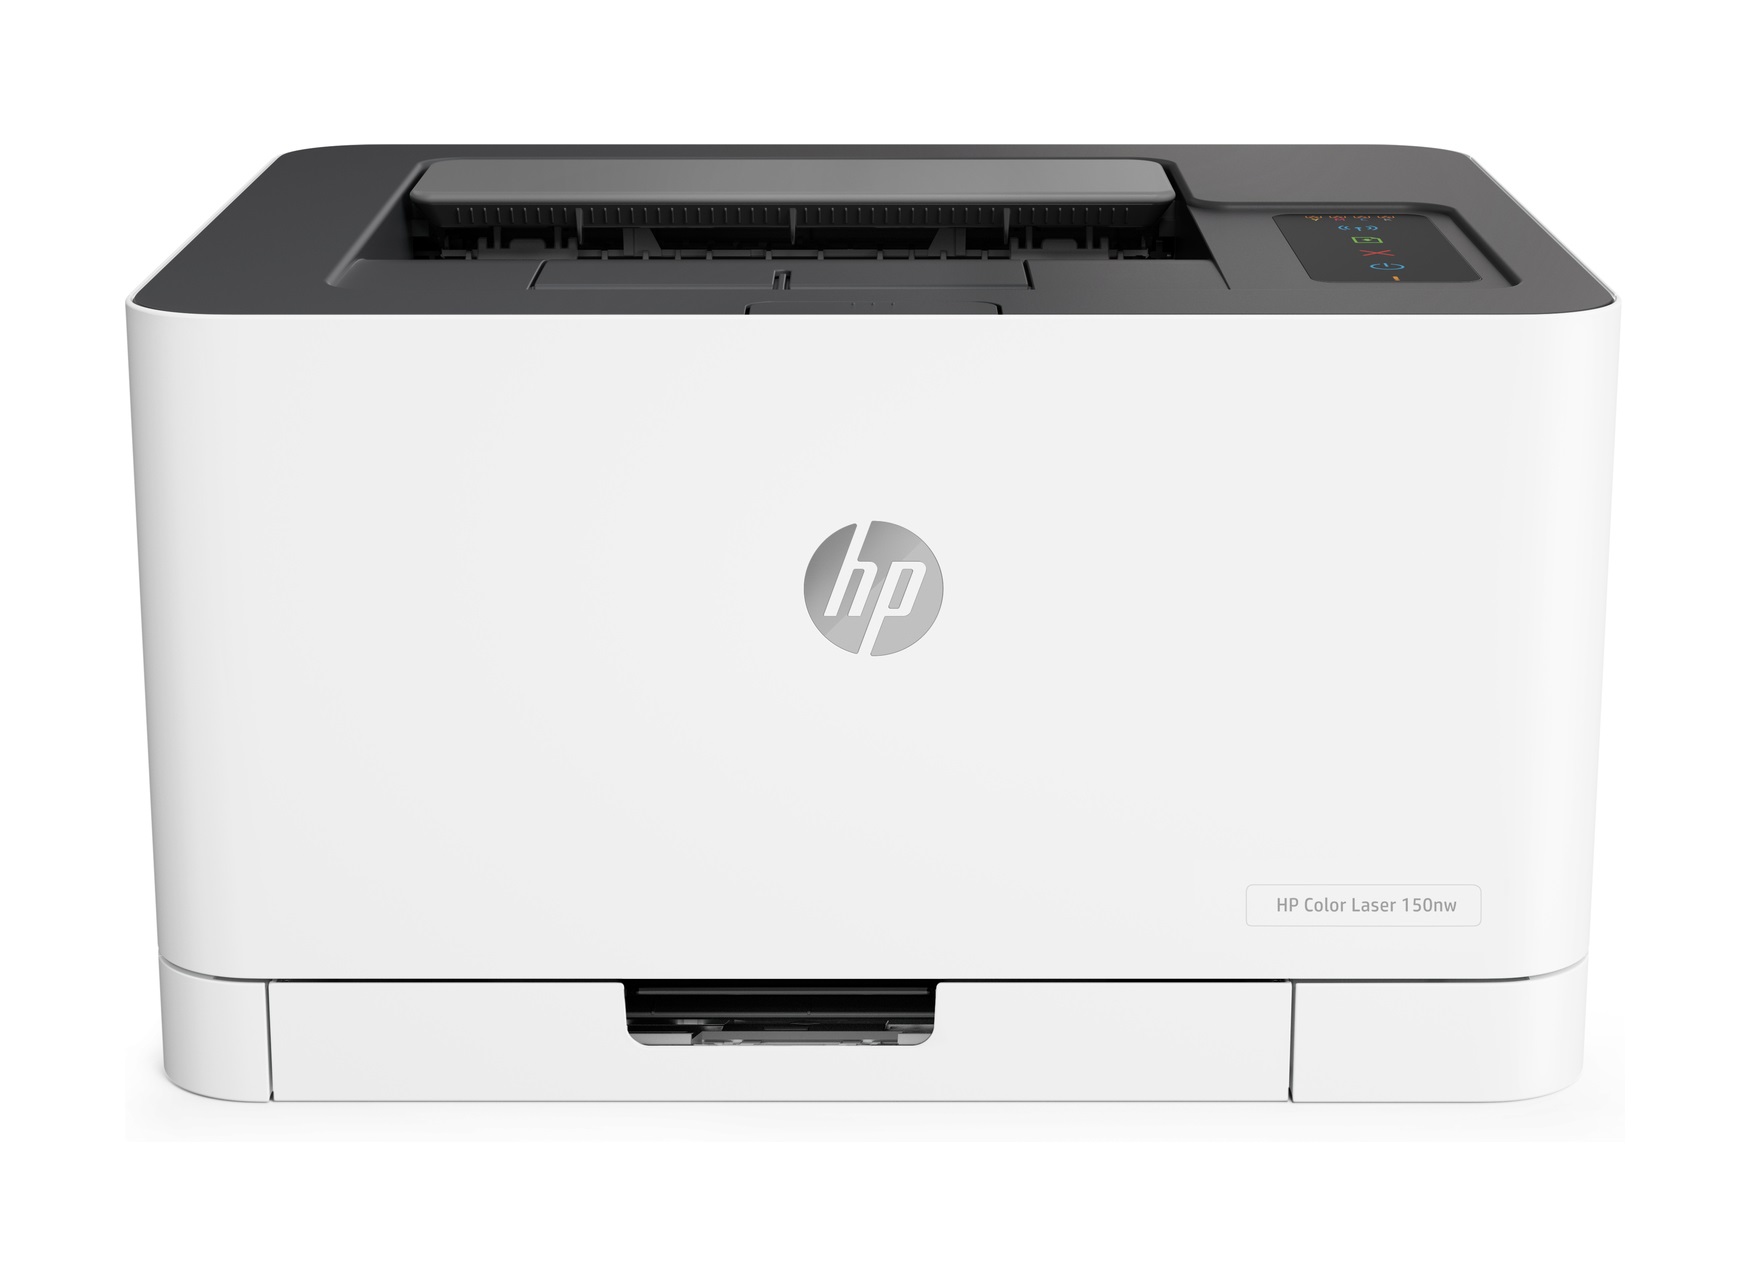 HP Refurbished Color Laser 150nw A4 Colour Printer